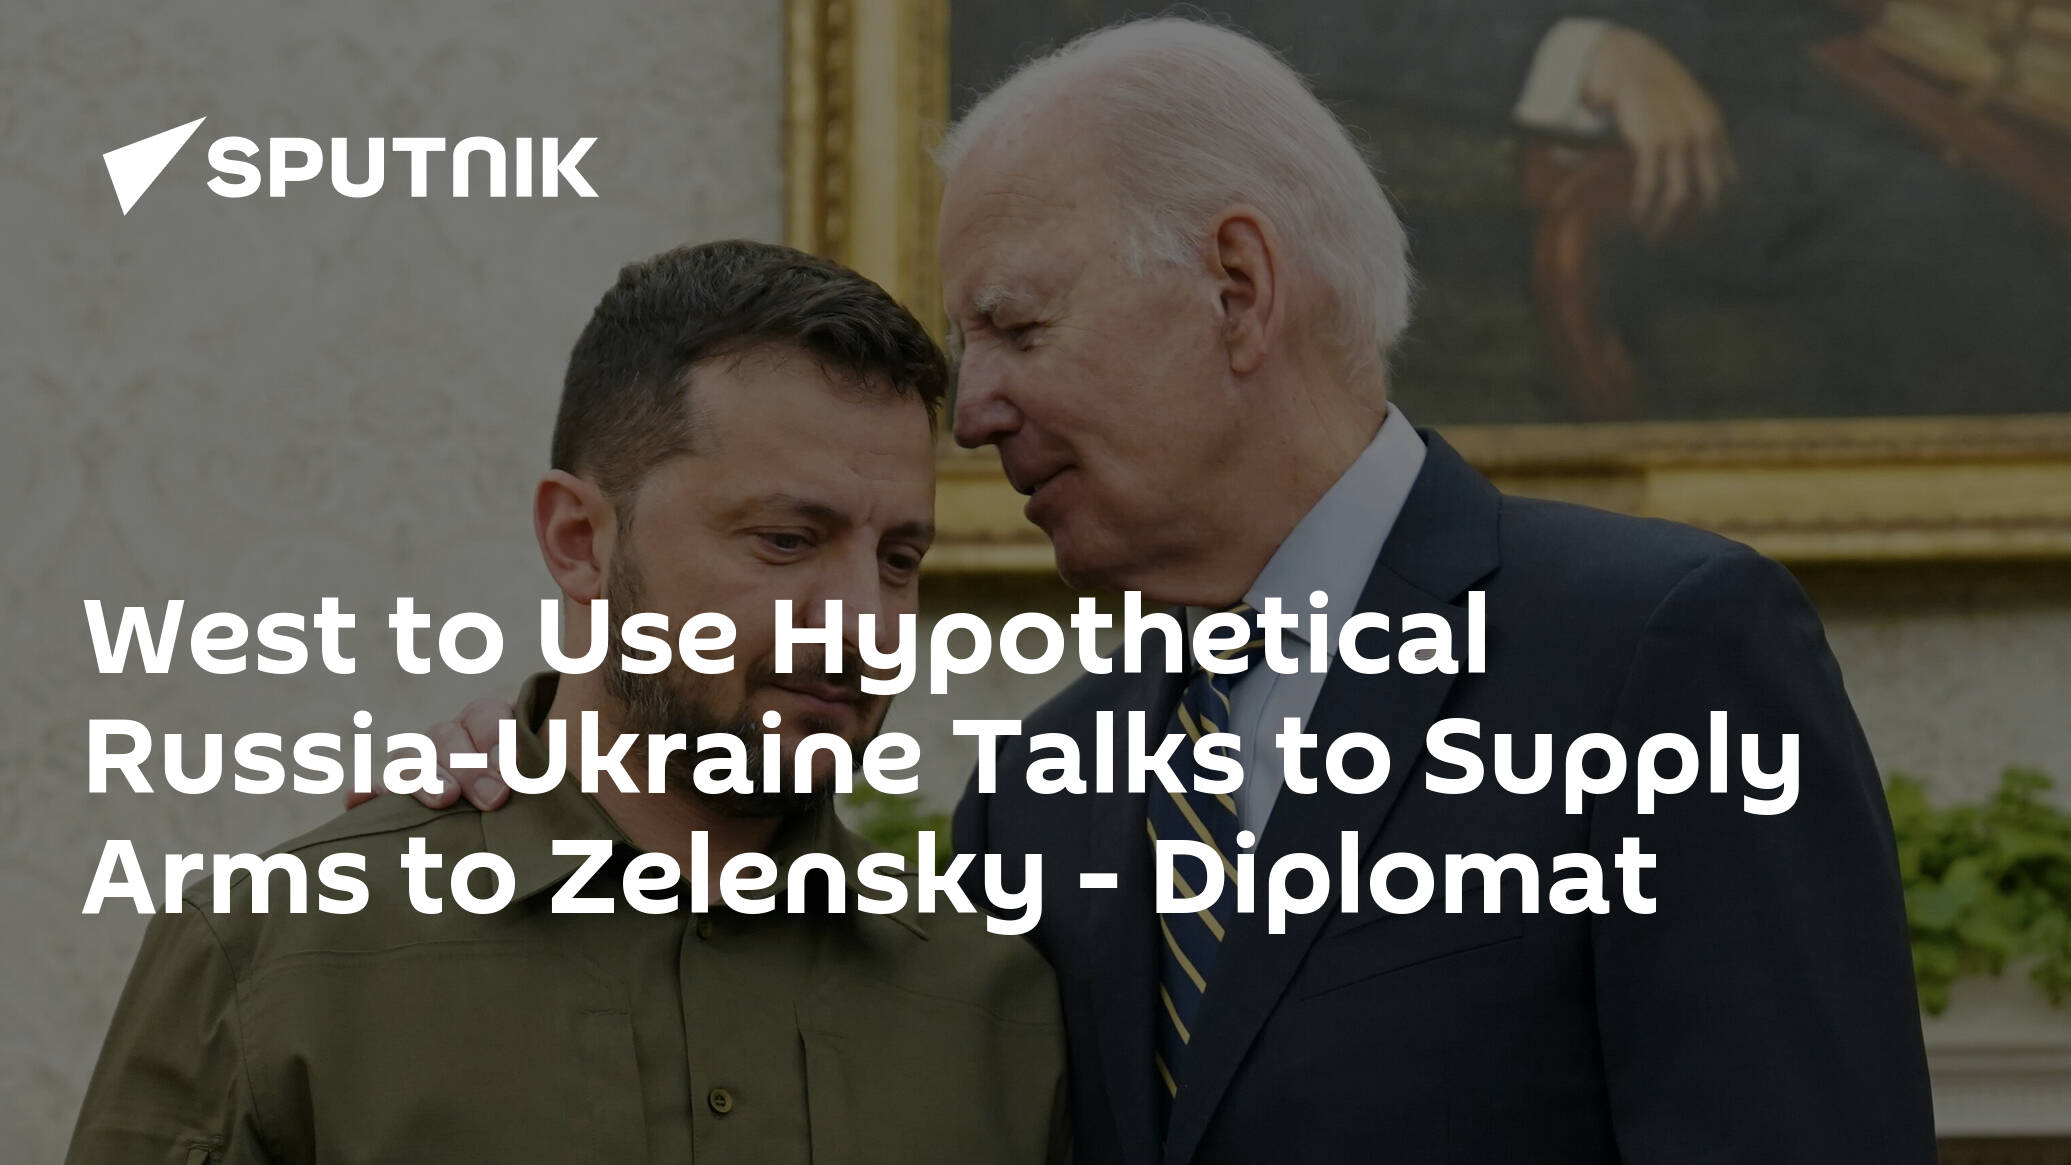 West to Use Hypothetical Russia-Ukraine Talks to Supply Arms to Zelensky- Diplomat